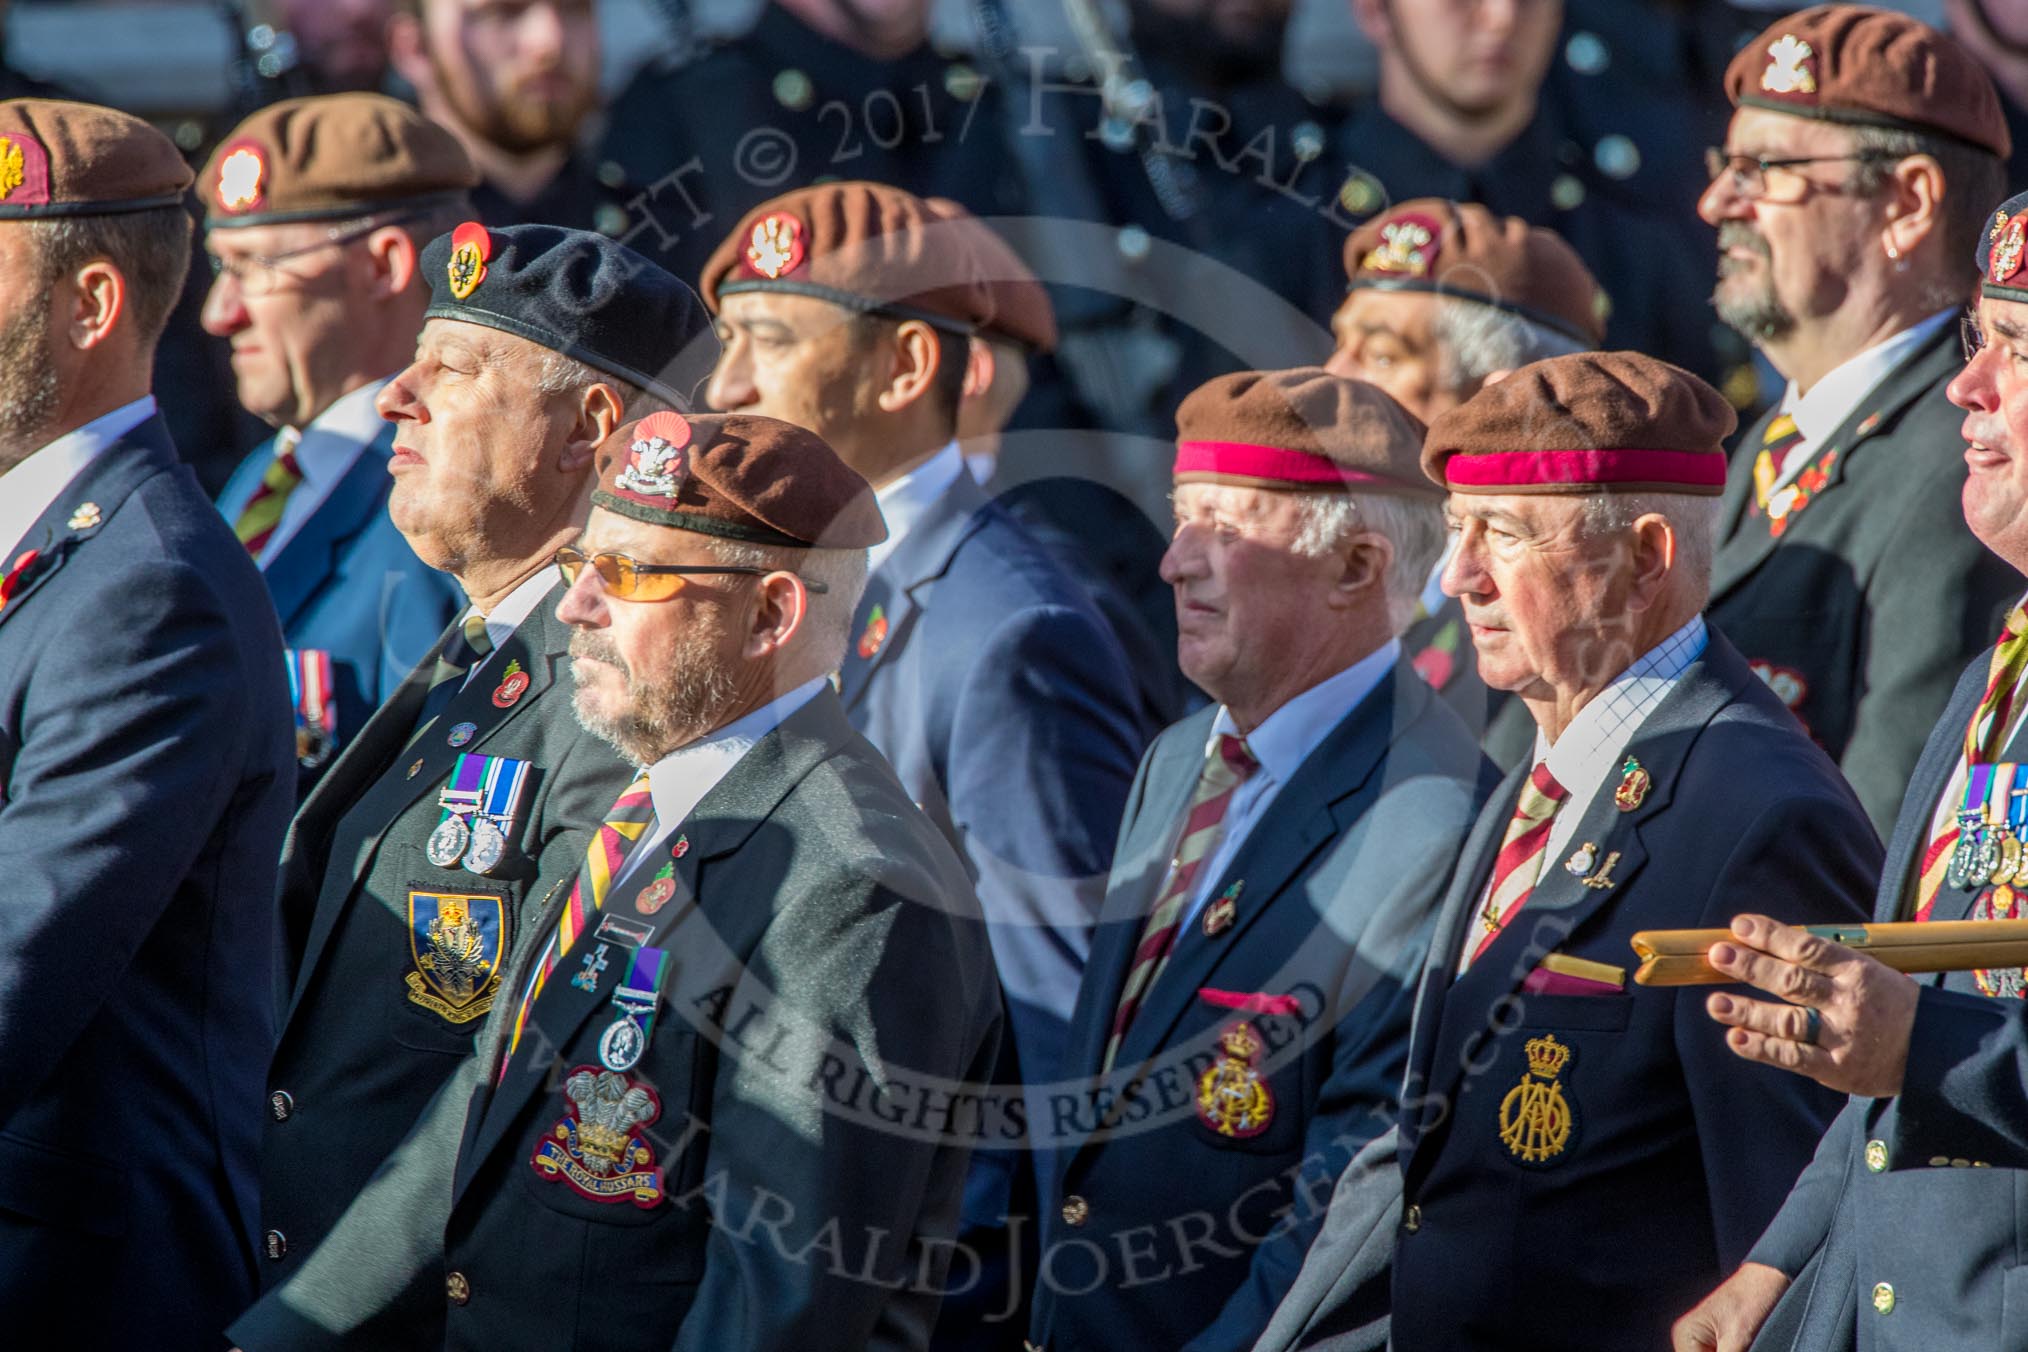 The King's Royal Hussars Regimental Association  (Group B21, 100 members) during the Royal British Legion March Past on Remembrance Sunday at the Cenotaph, Whitehall, Westminster, London, 11 November 2018, 12:10.